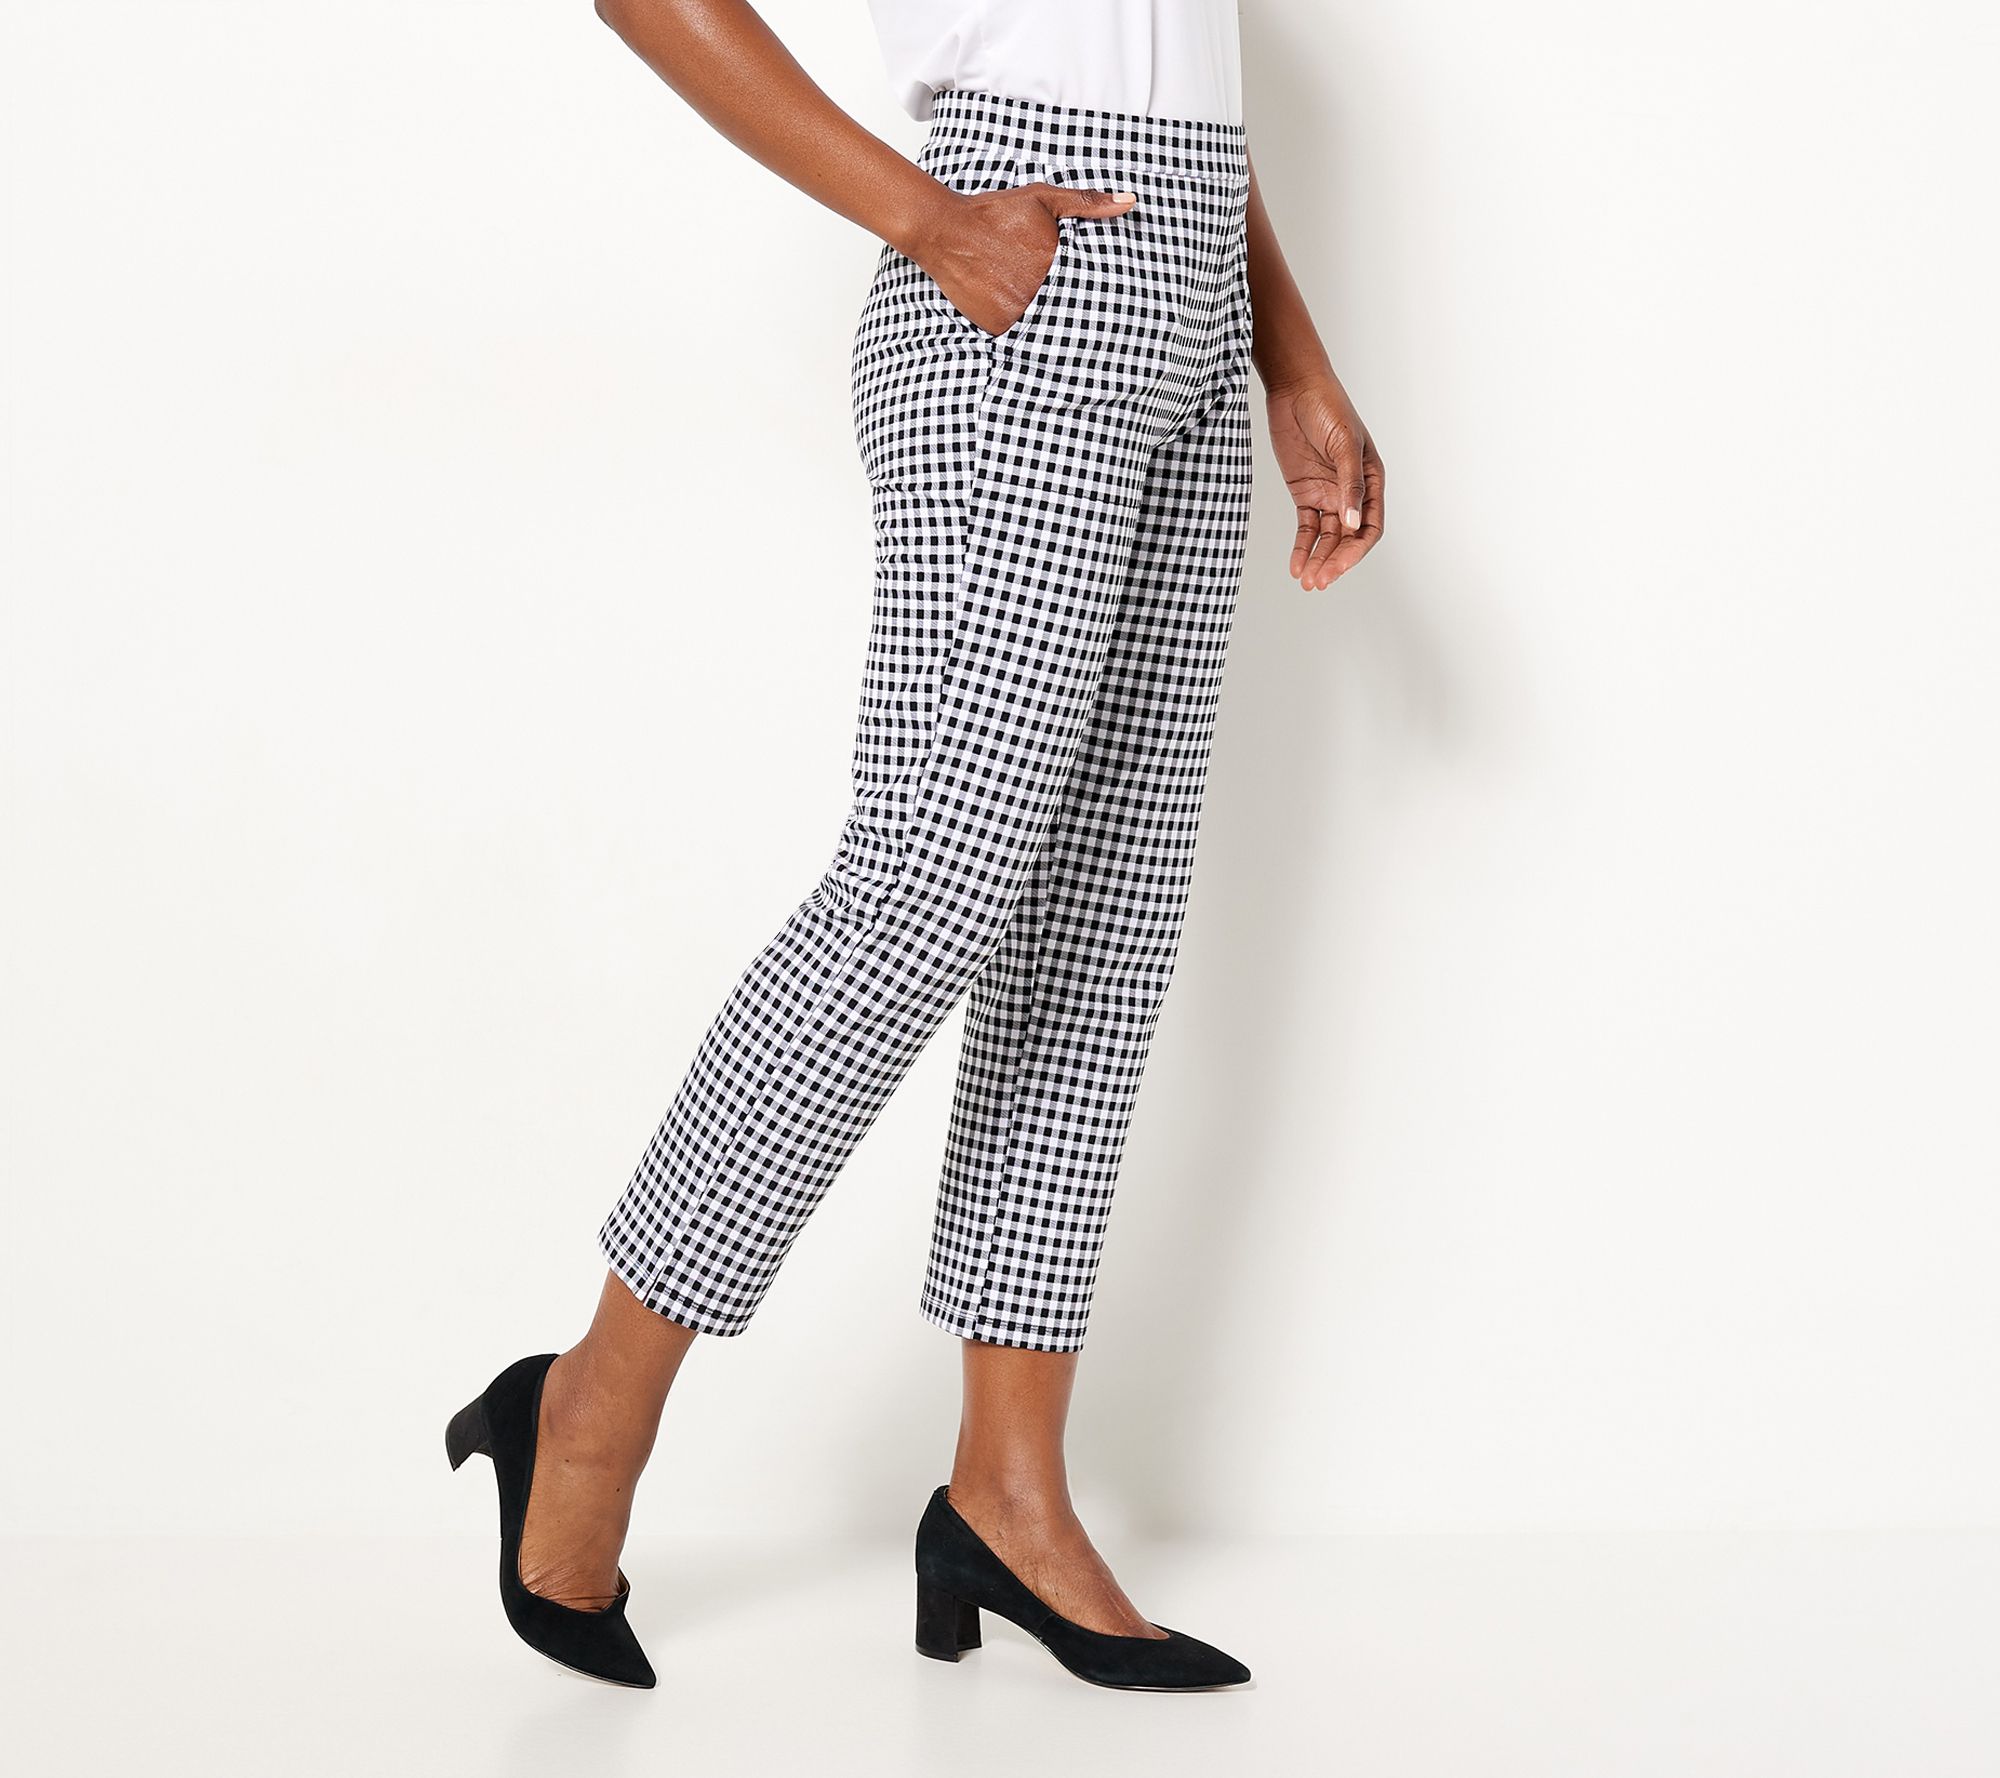 Houndstooth Pants from Uniqlo by Kelly in the City